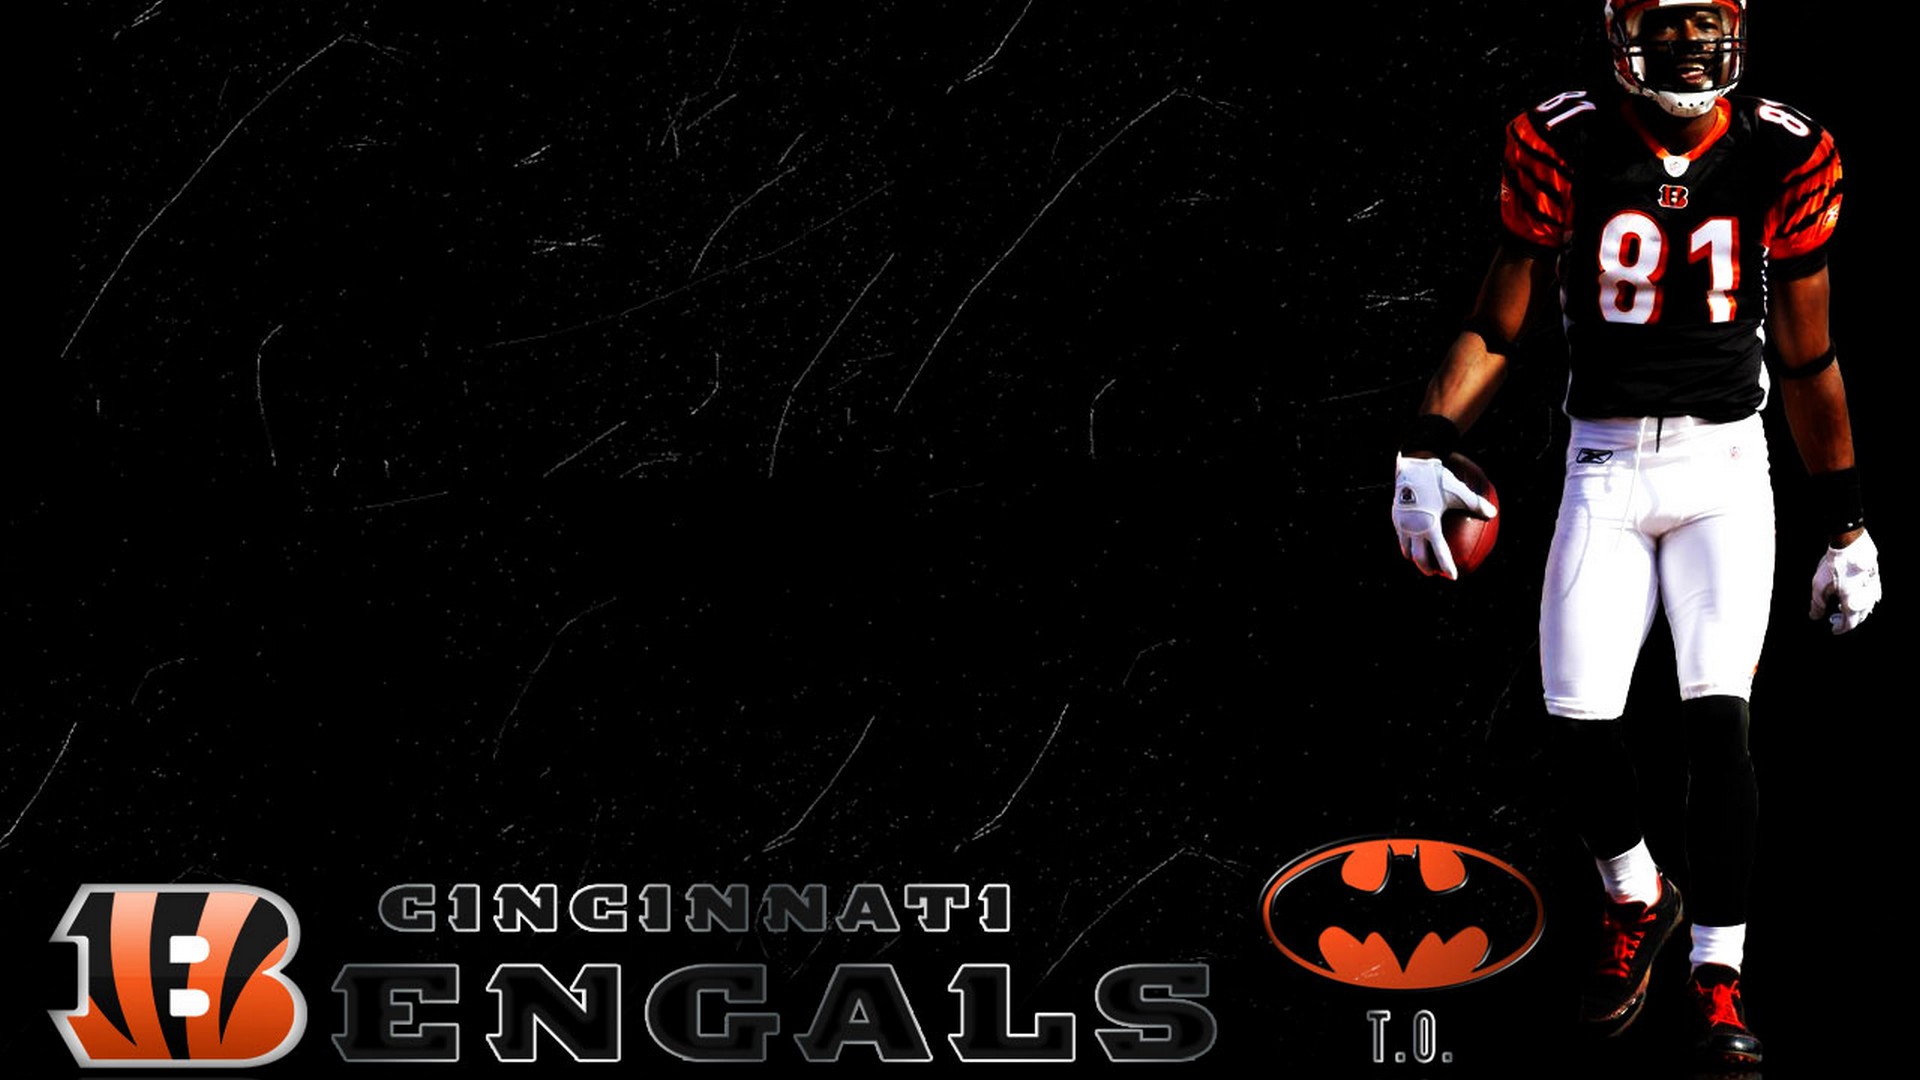 Cincinnati Bengals Wallpaper for Computer With high-resolution 1920X1080 pixel. Download and set as wallpaper for Desktop Computer, Apple iPhone X, XS Max, XR, 8, 7, 6, SE, iPad, Android